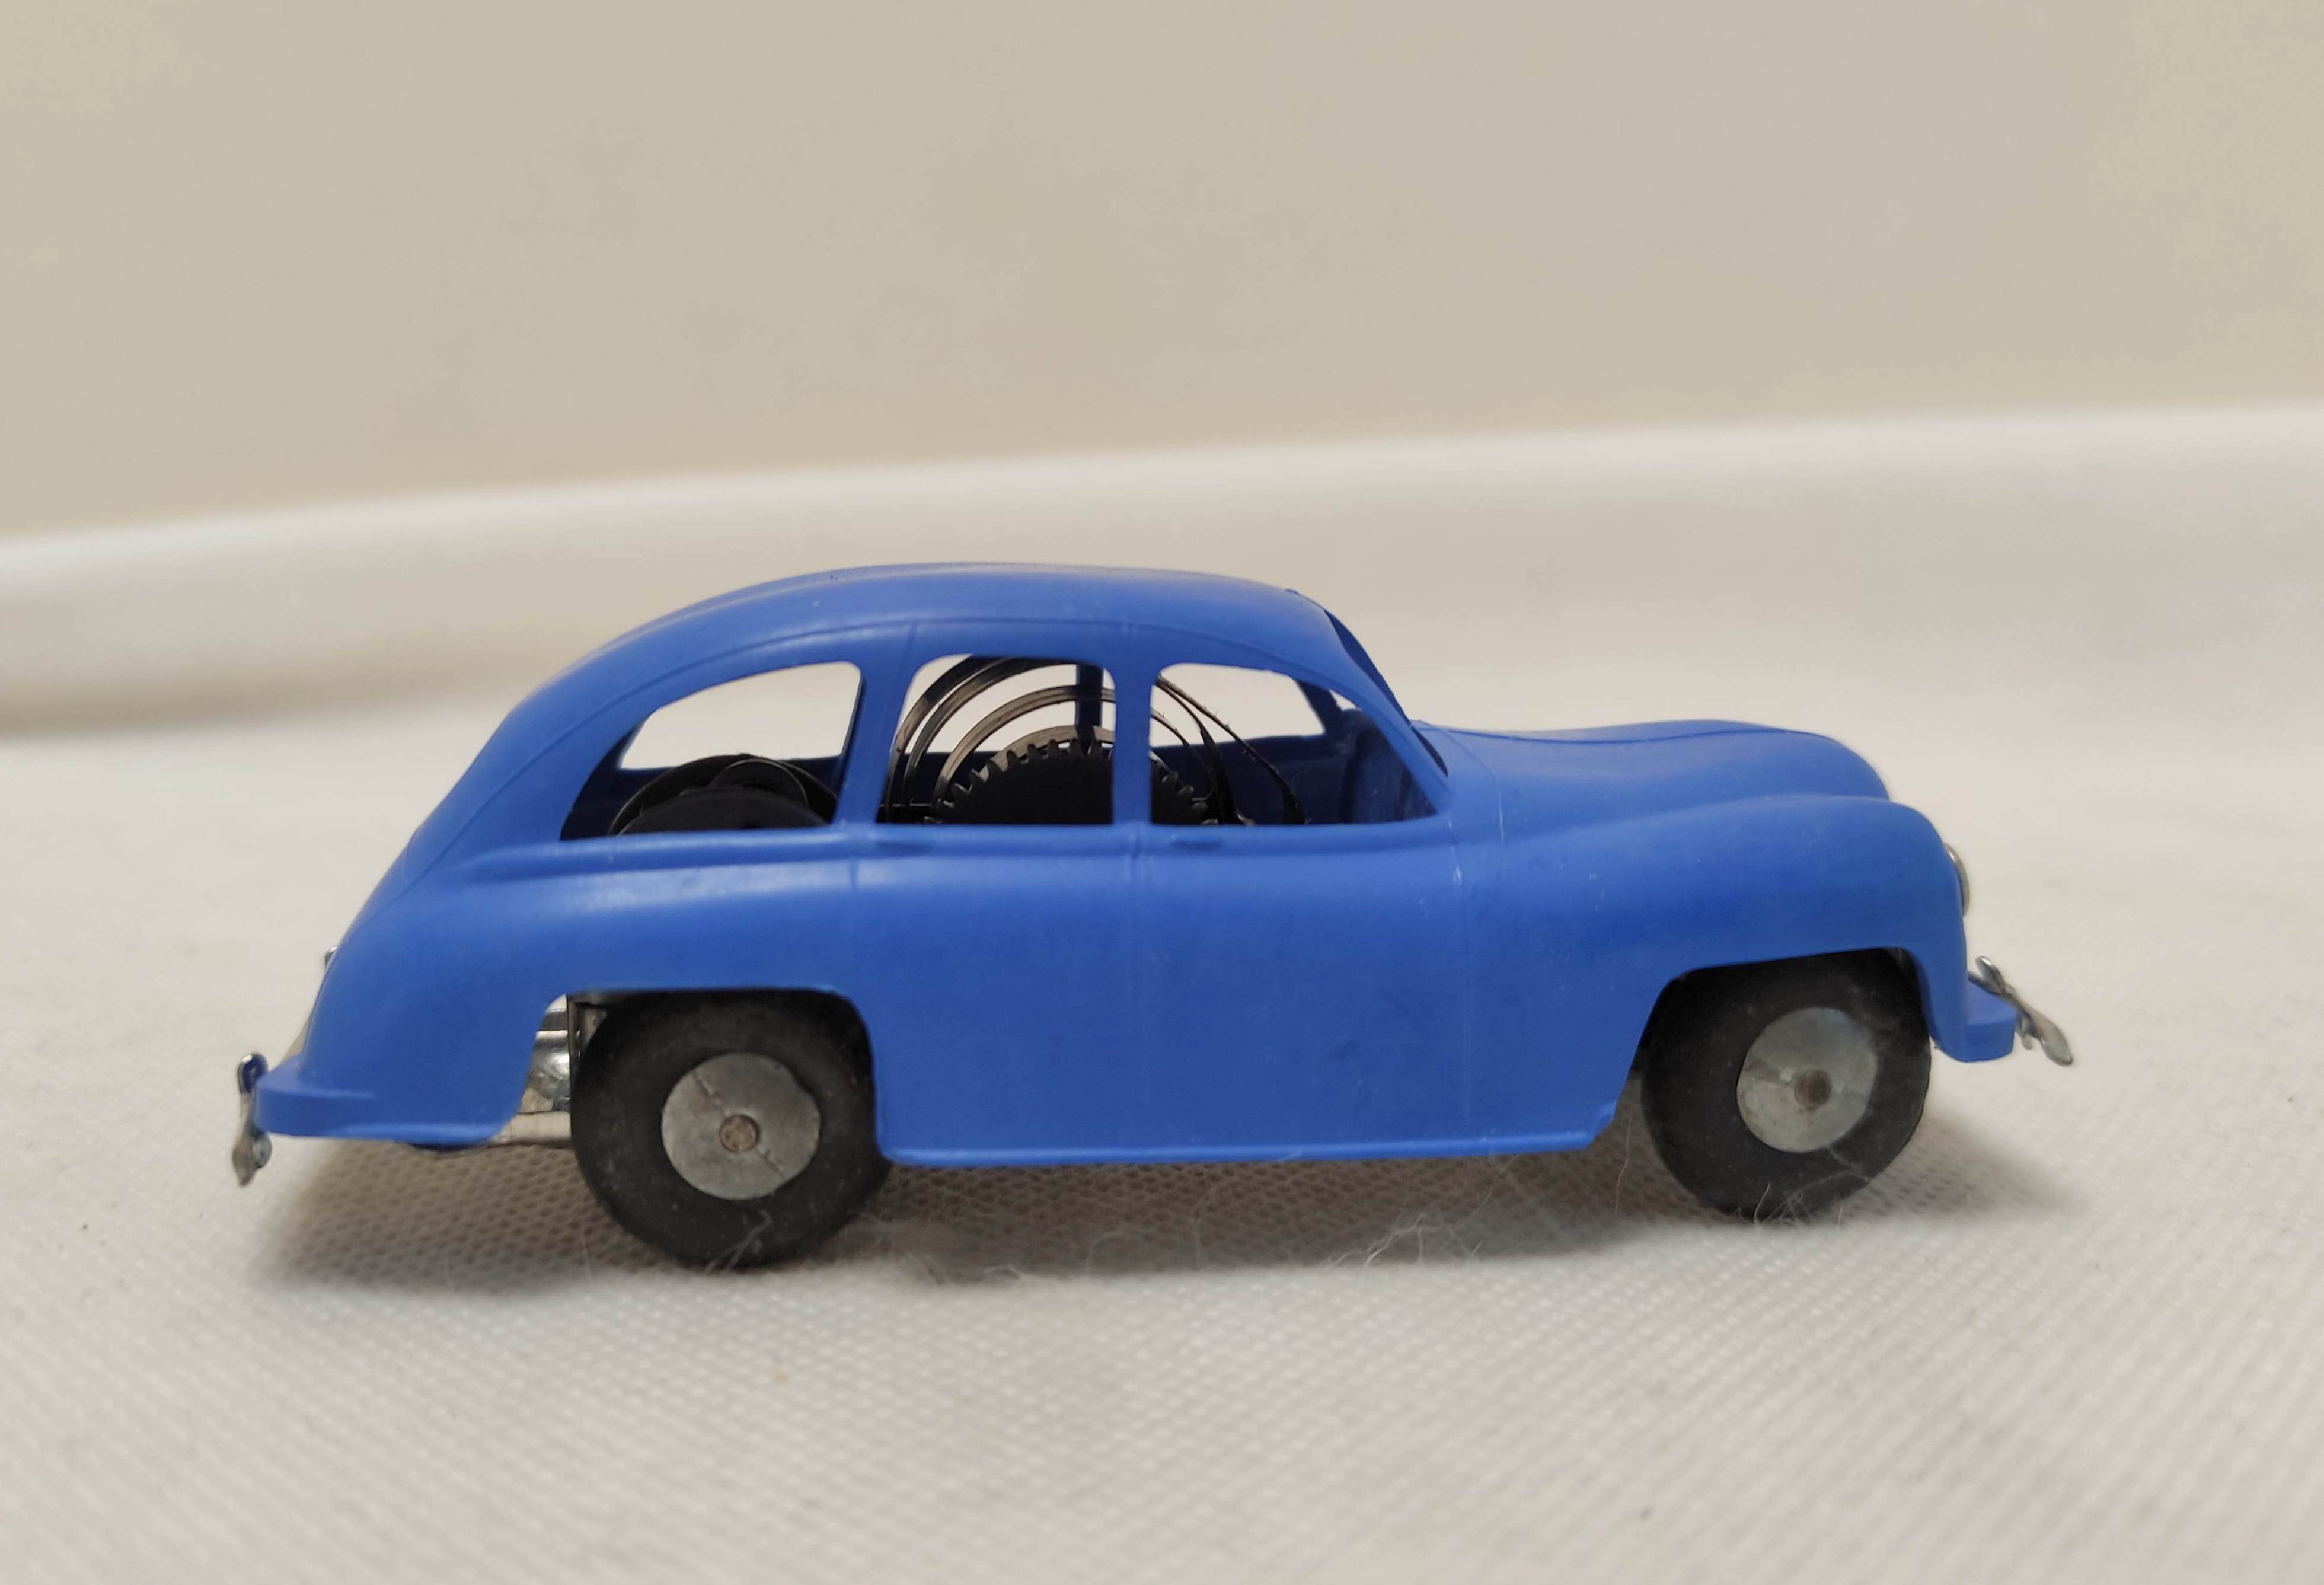 Tri-ang Minic Standard Vanguard clockwork car with blue plastic body. Complete with original box and - Image 5 of 7